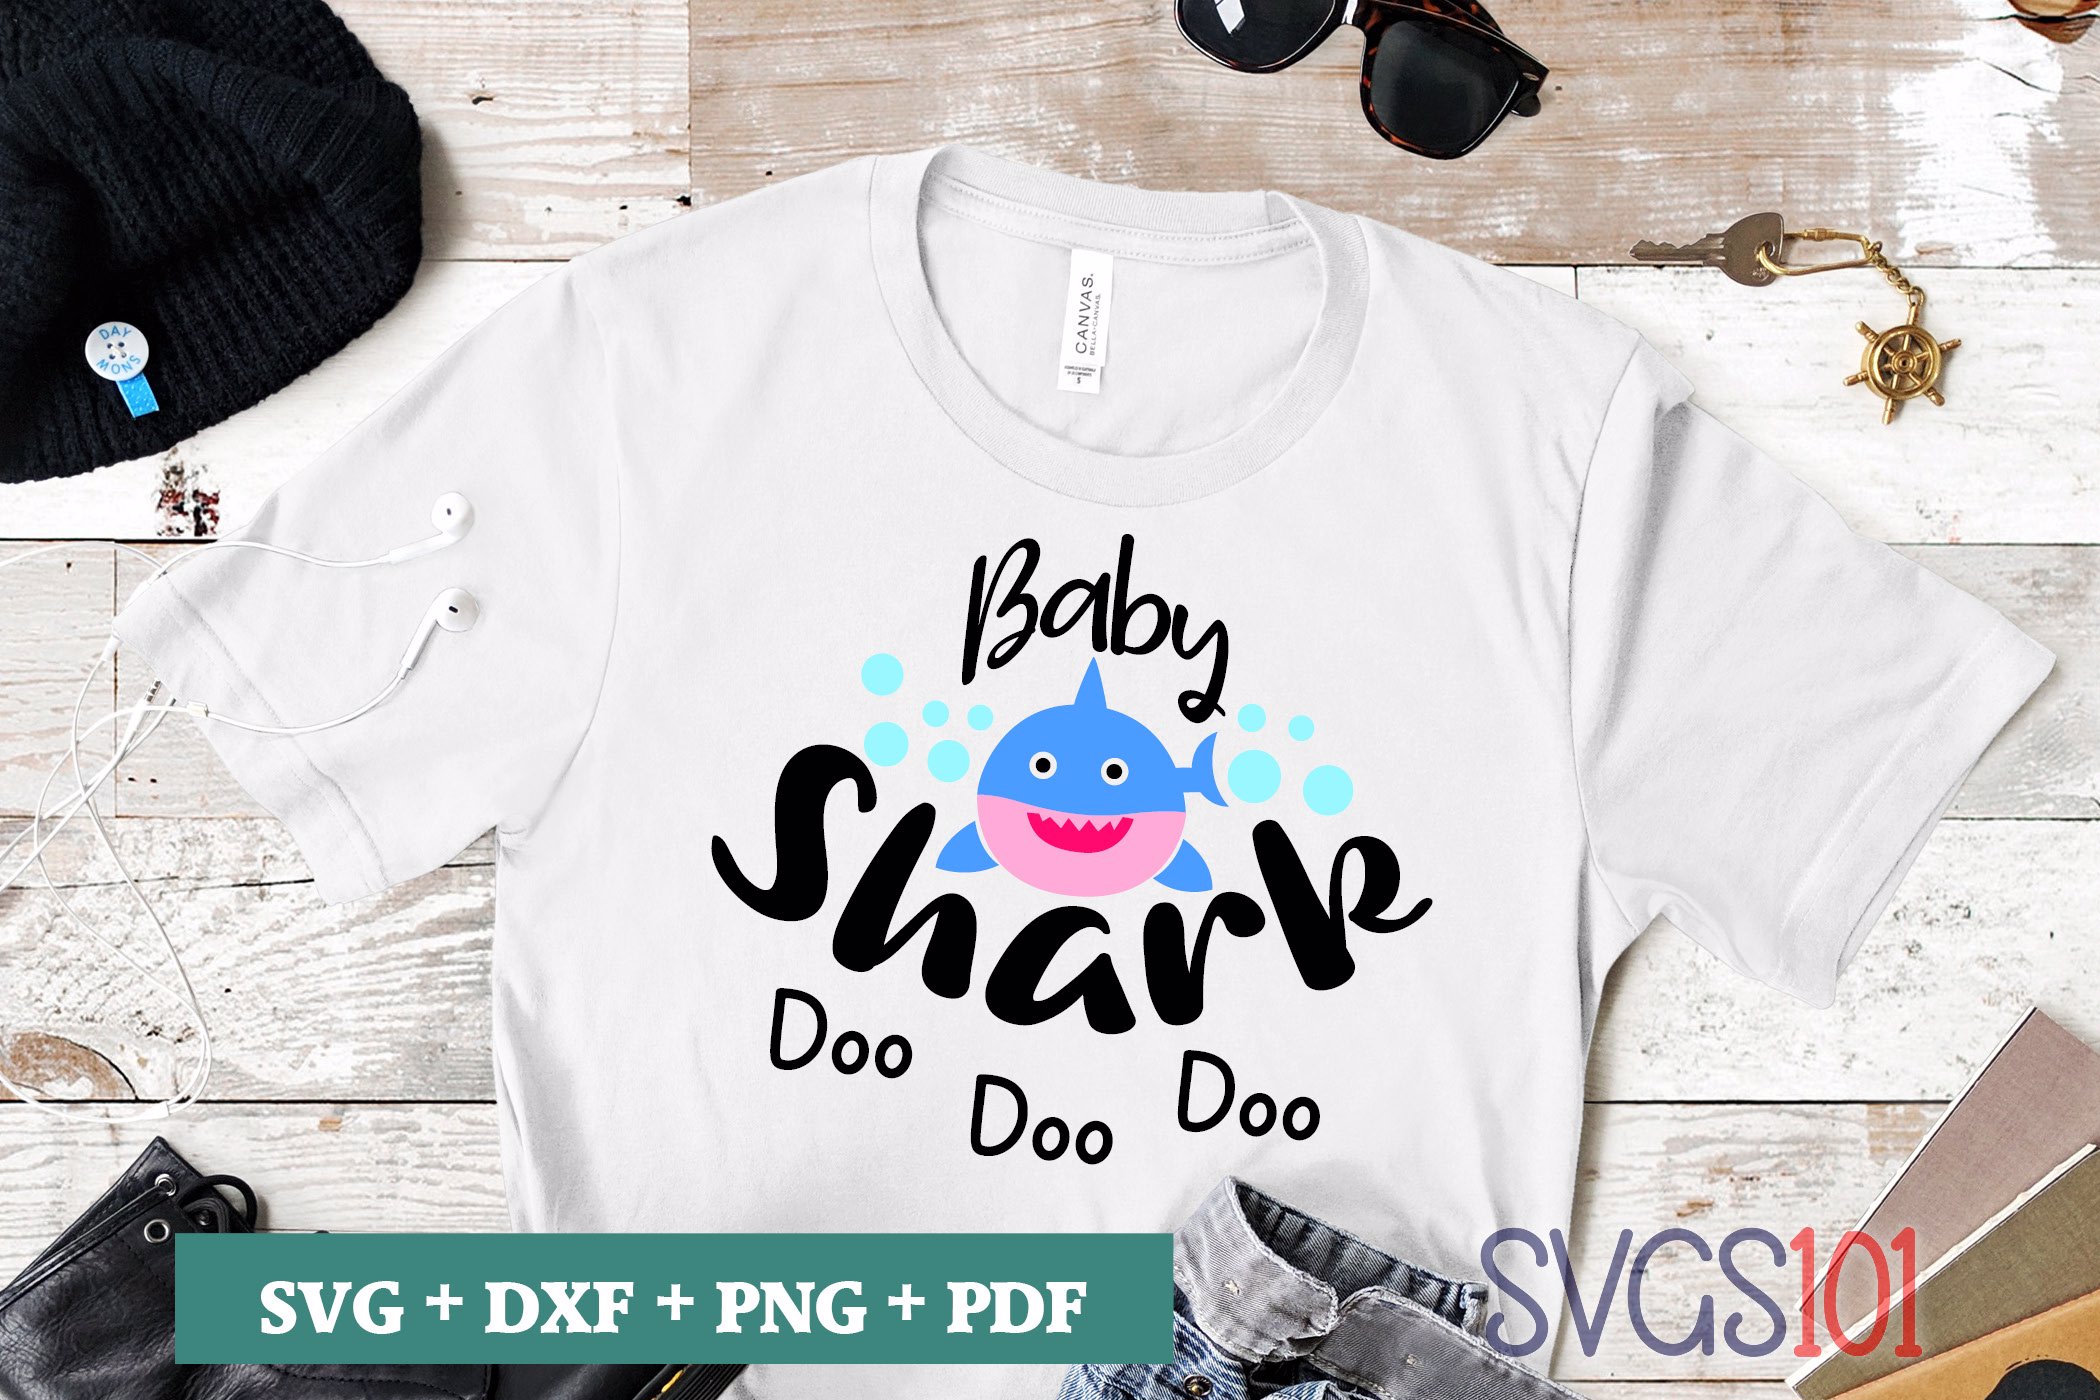 Download Baby Shark Doo Doo Doo SVG Cuttable file - DXF, EPS, PNG ...